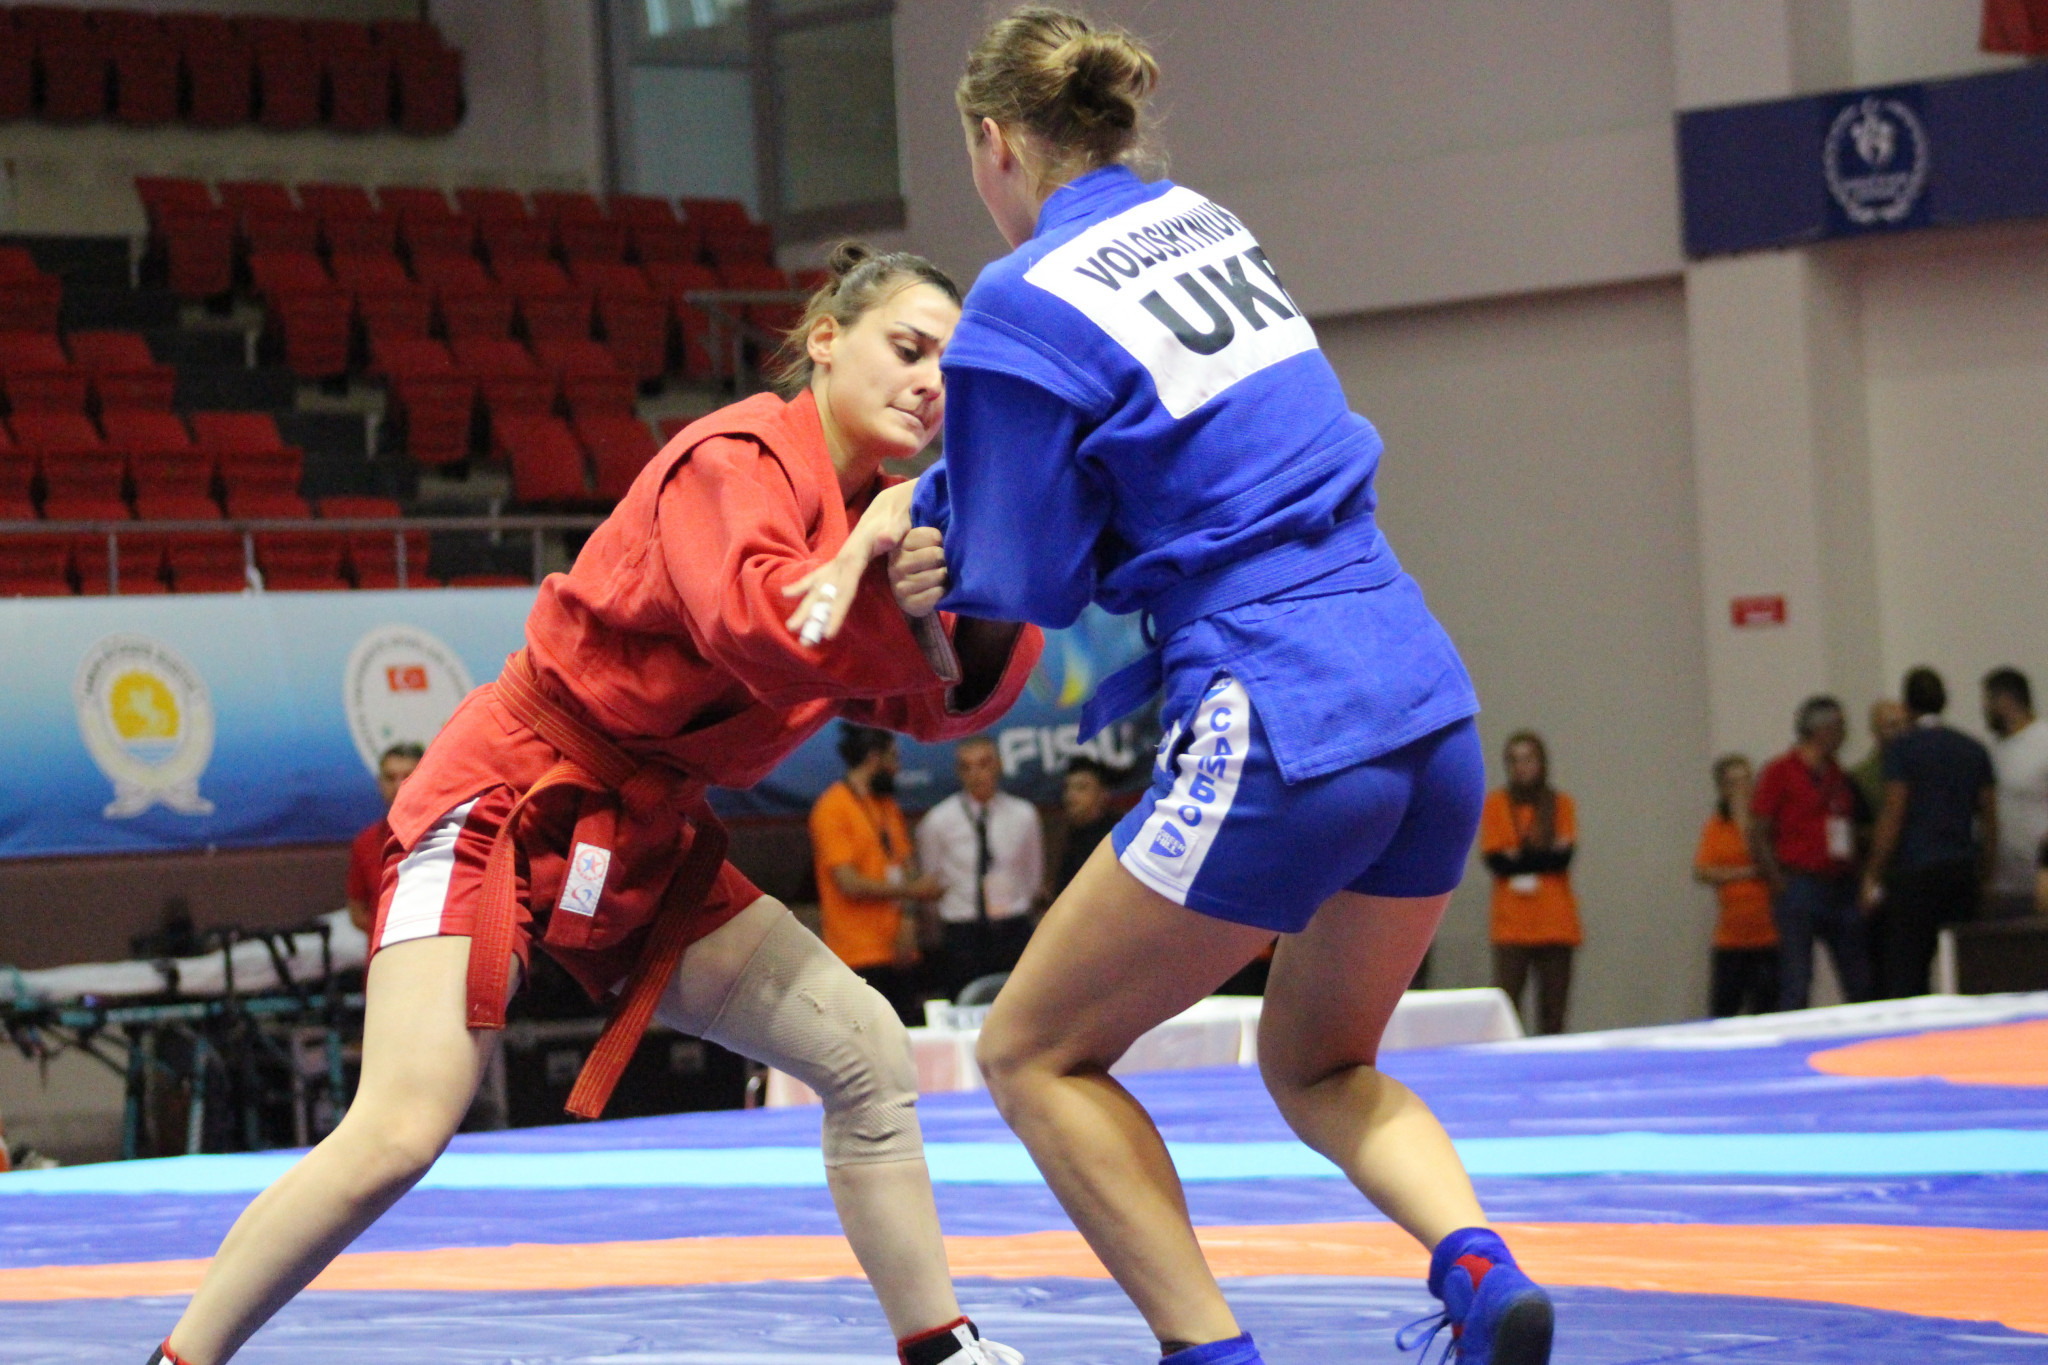 Ukraine claimed four golds on the first day of sambo ©FISU